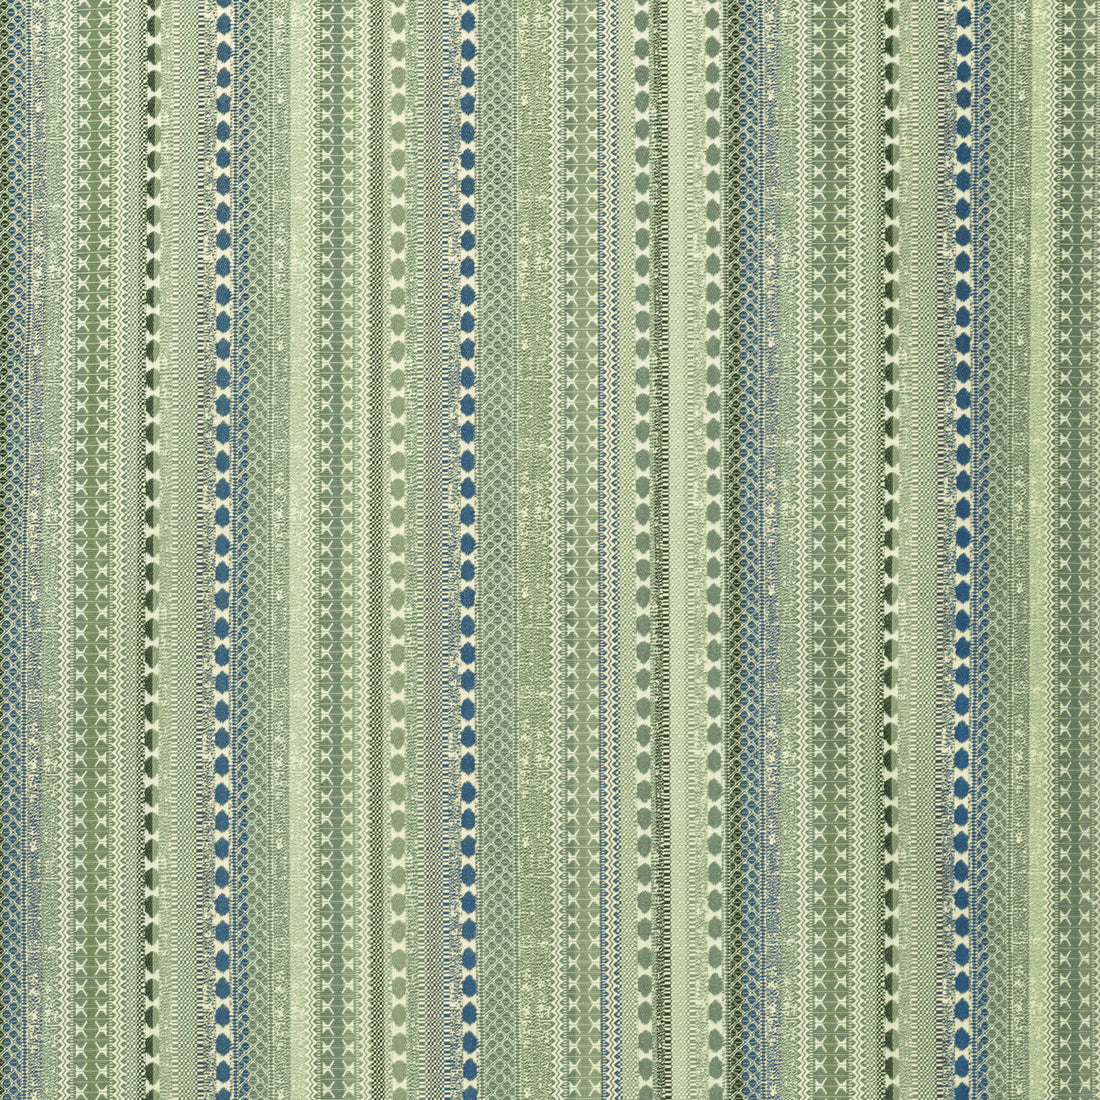 Palmete Weave fabric in aqua color - pattern 2021101.335.0 - by Lee Jofa in the Triana Weaves collection